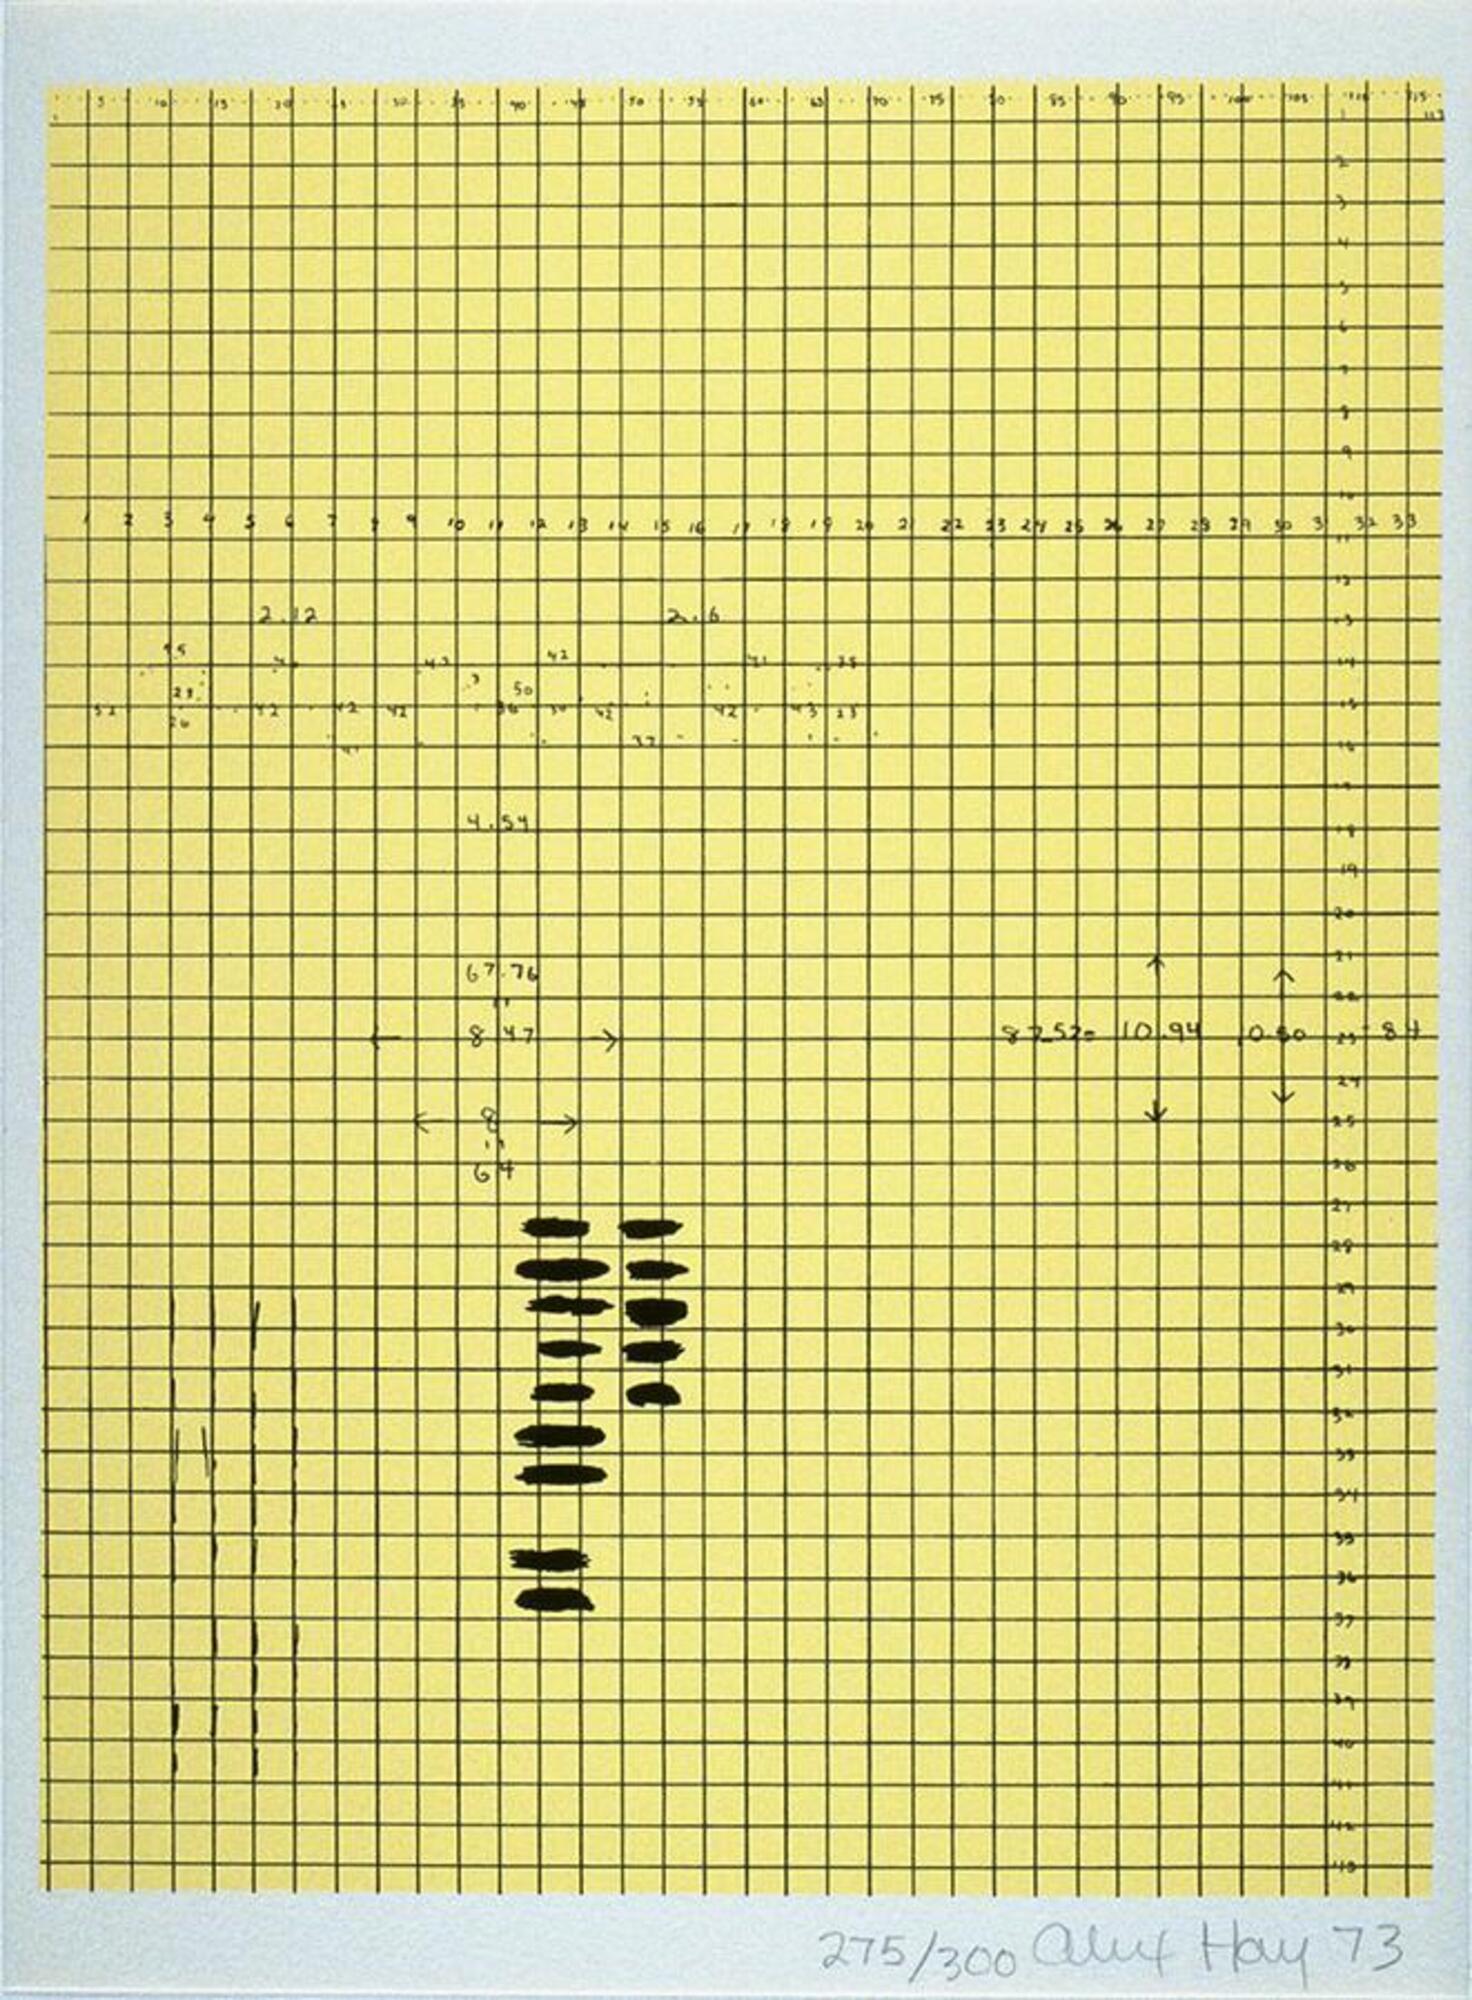 A print entirely in yellow, with hand drawn grid lines. On the grid lines, various measurements and marks have been made.<br /><br />
EC 2017